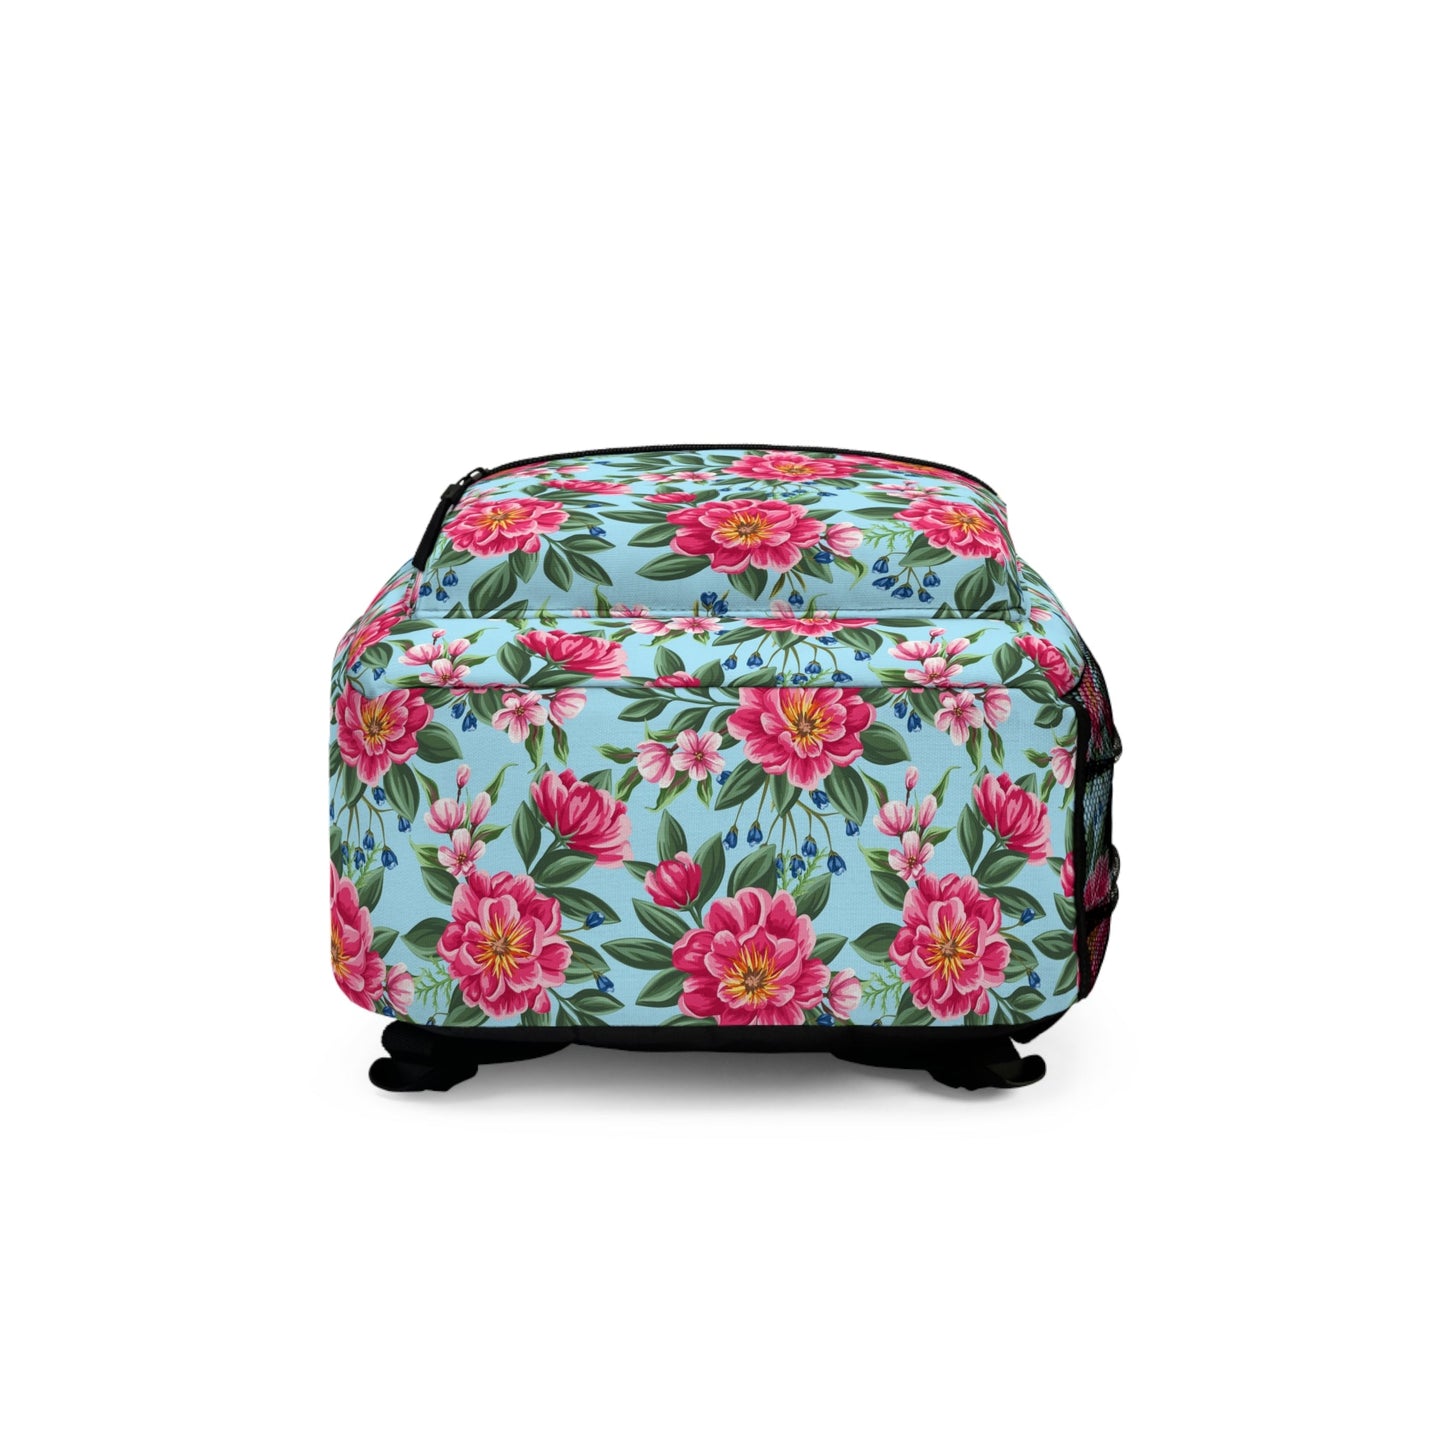 Bags - Sea Of Peonies Roomy And Durable Backpack